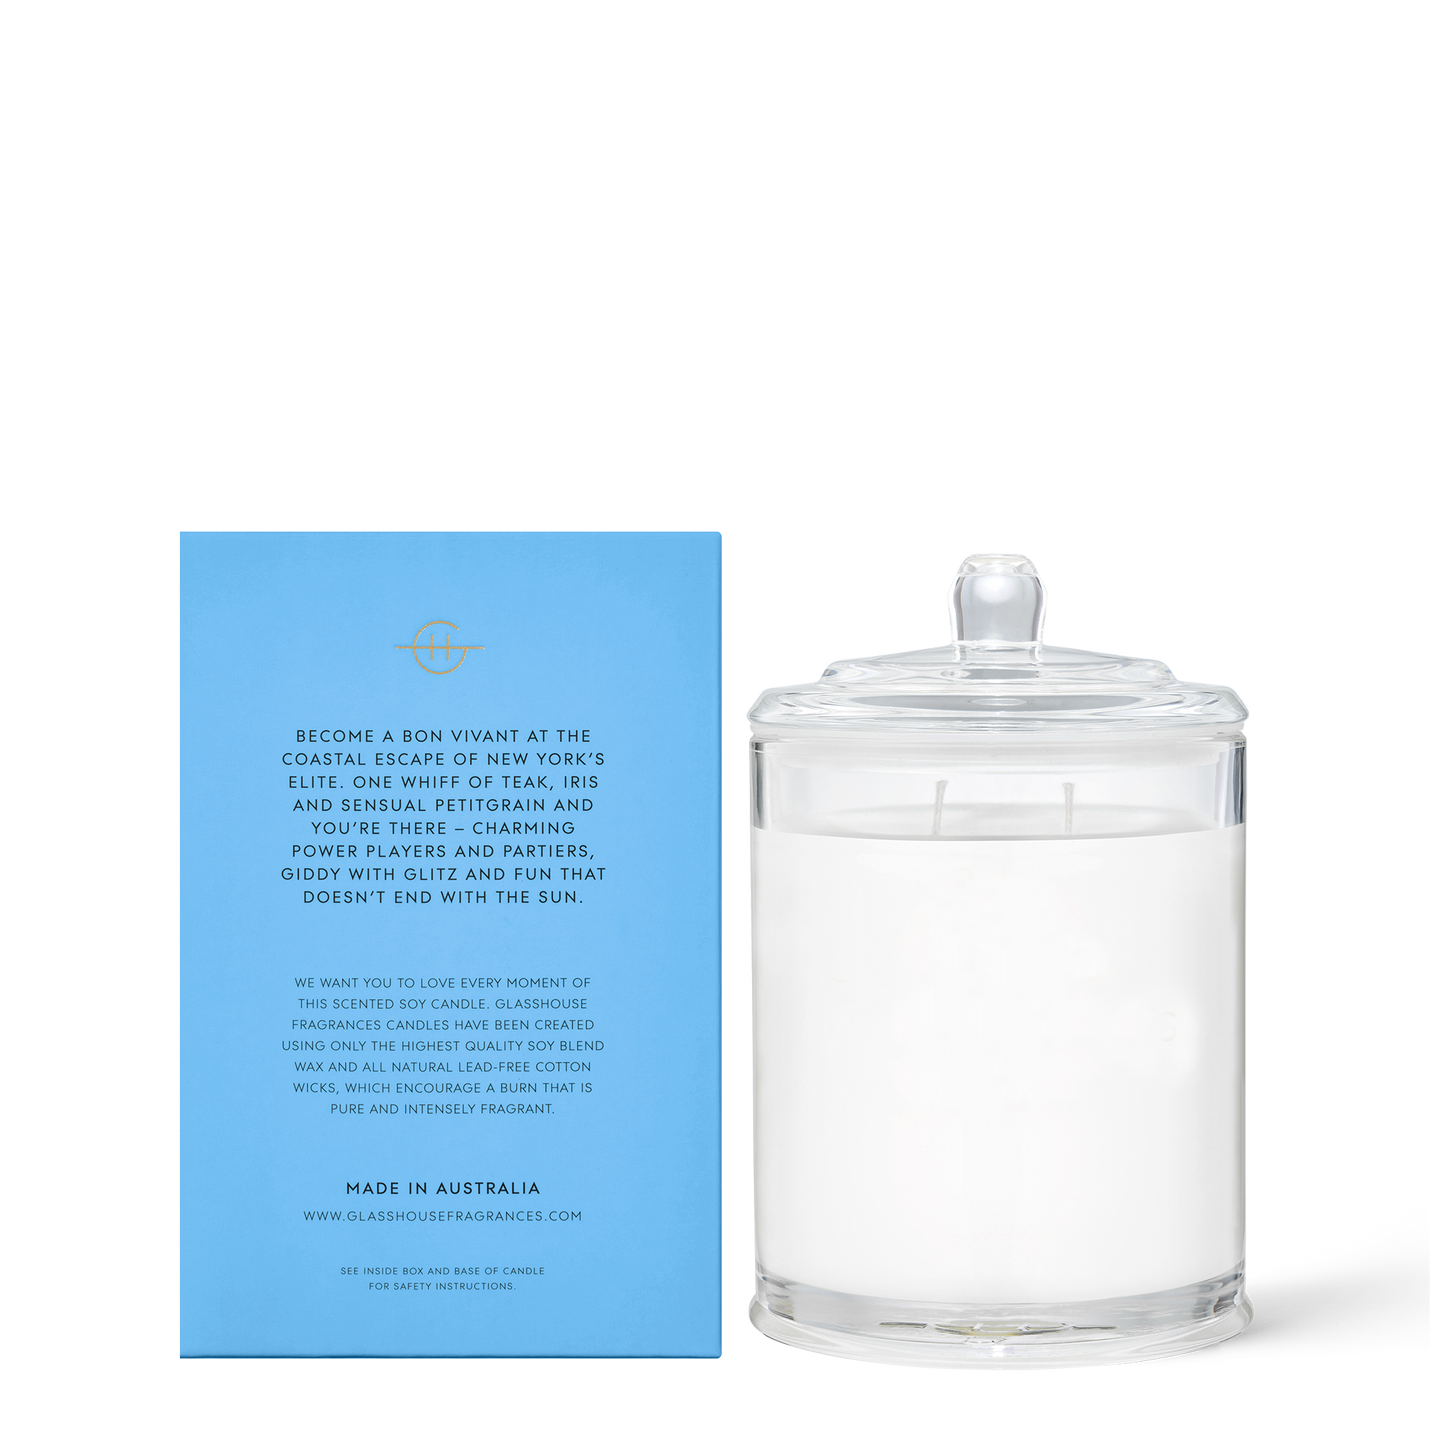 The Hamptons 380g Soy Candle - Glasshouse Fragrances